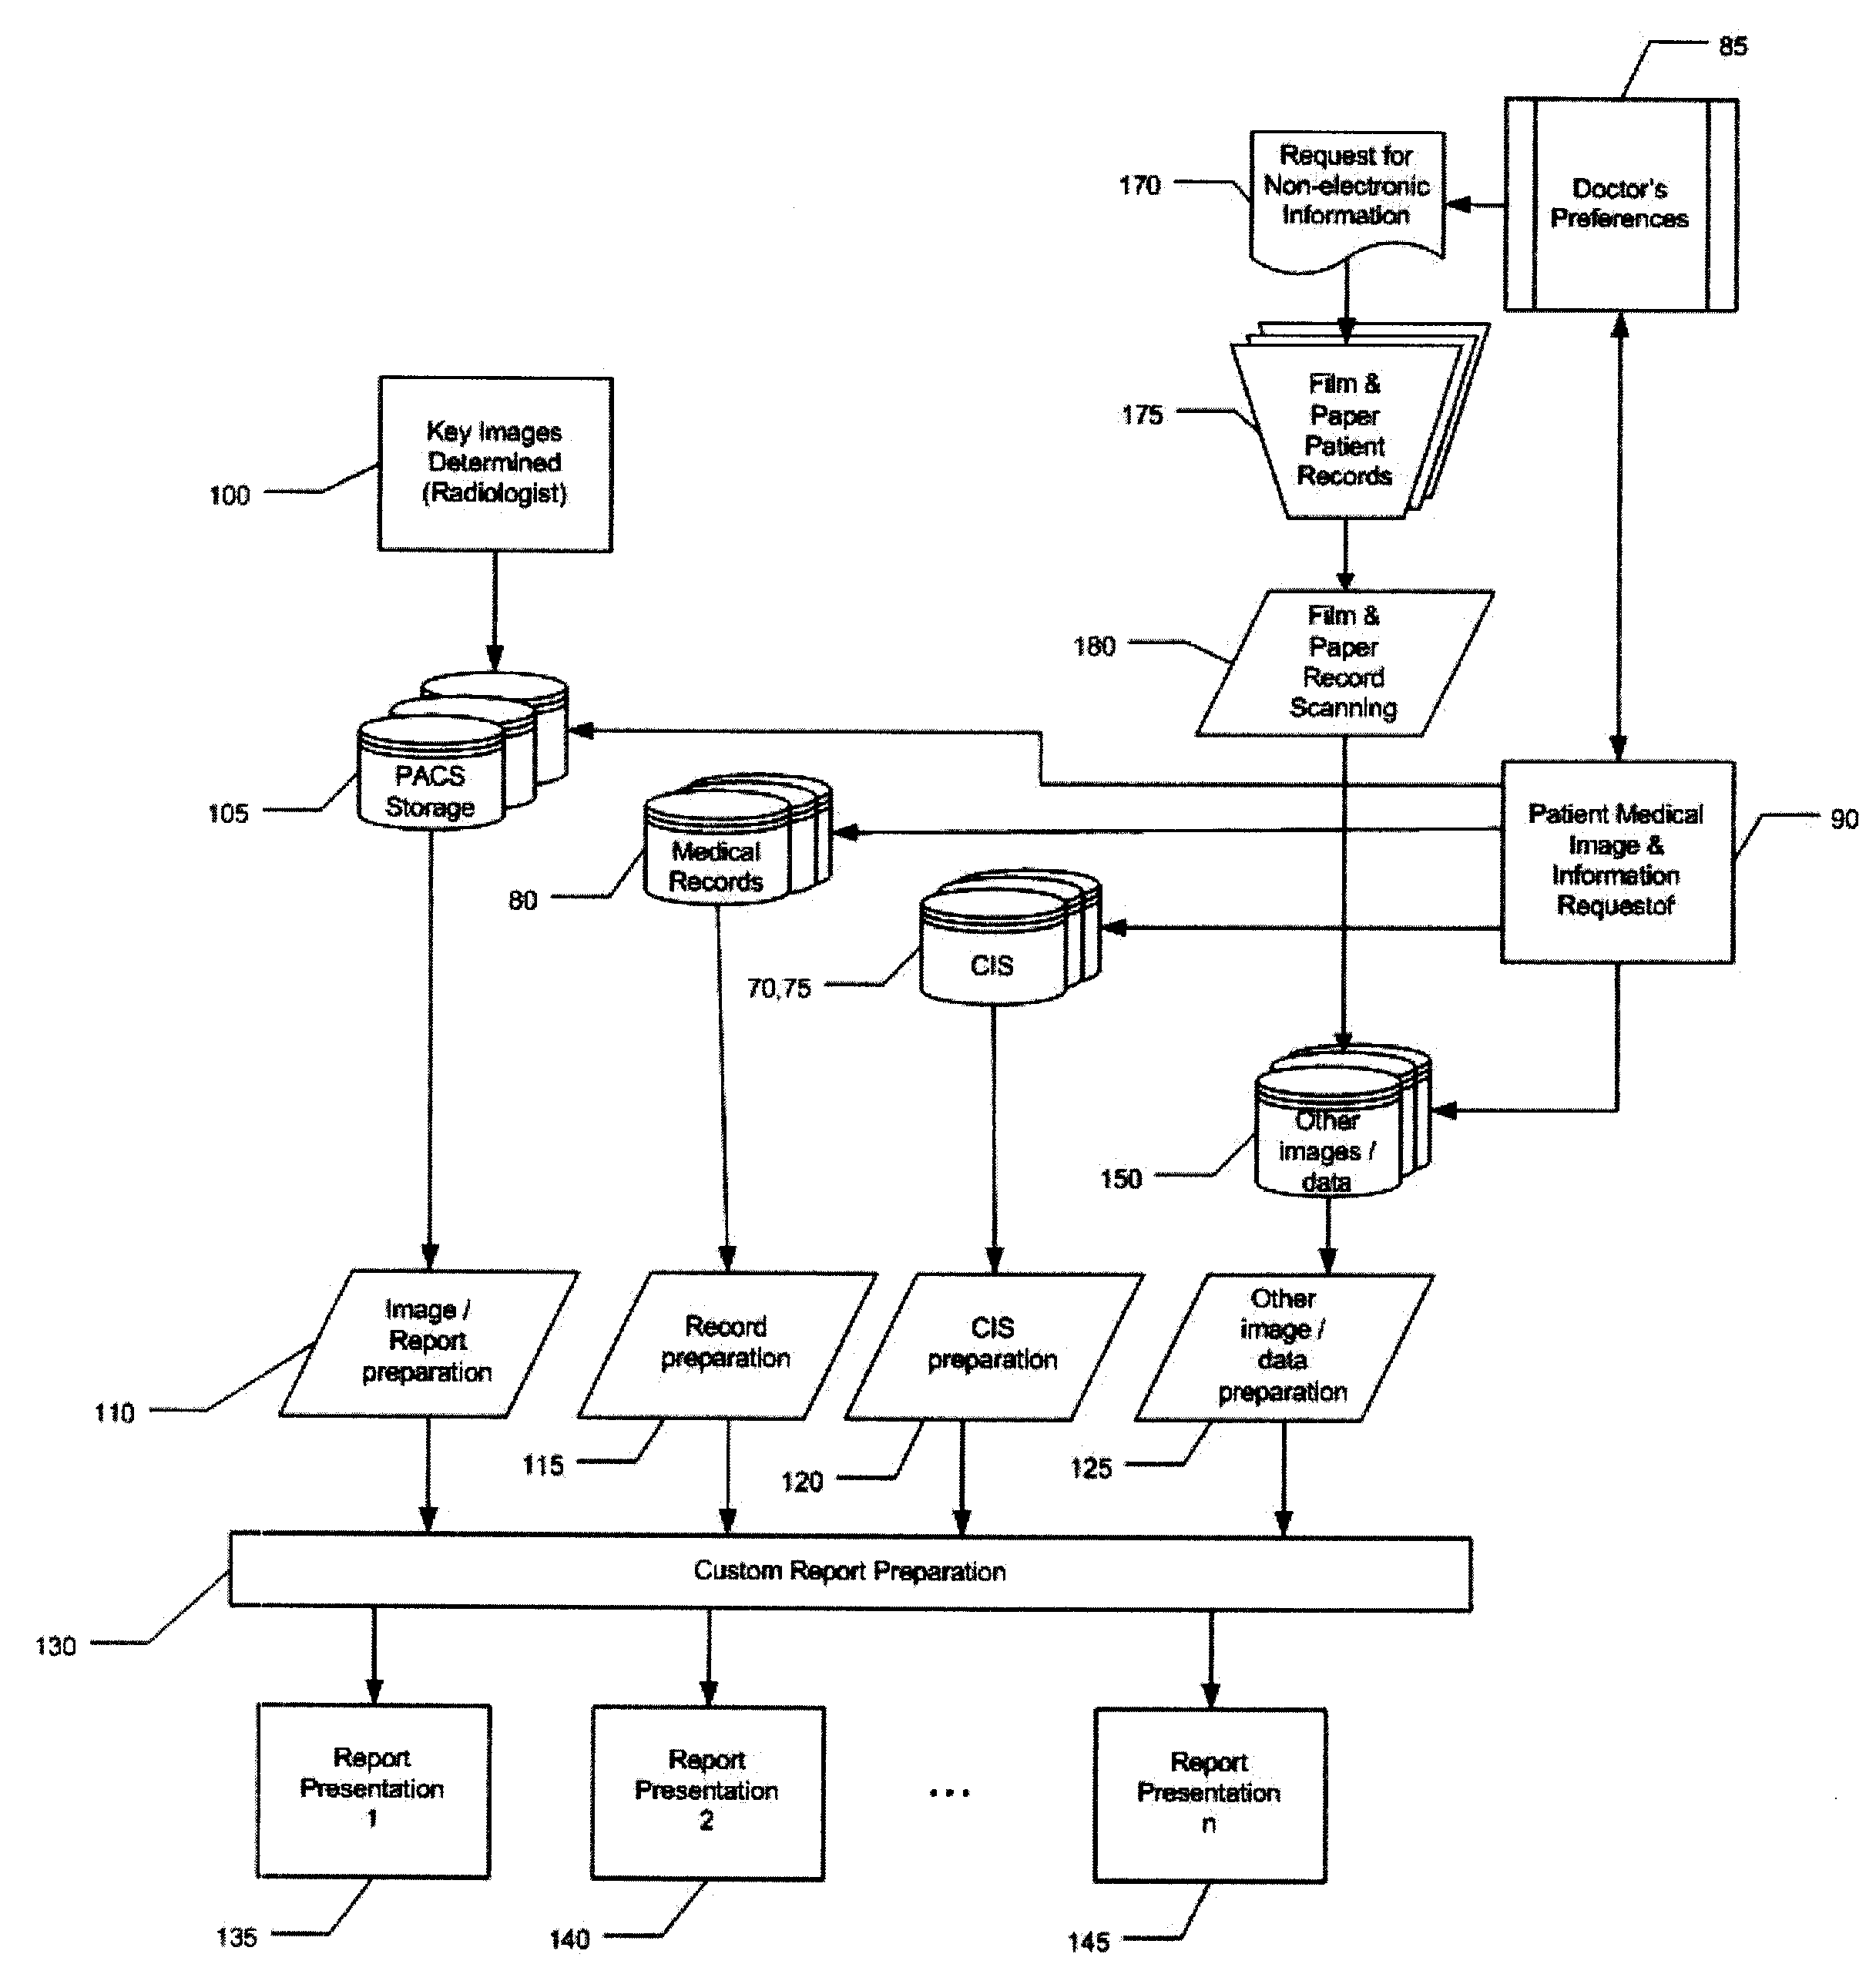 Automated custom report generation system for medical information